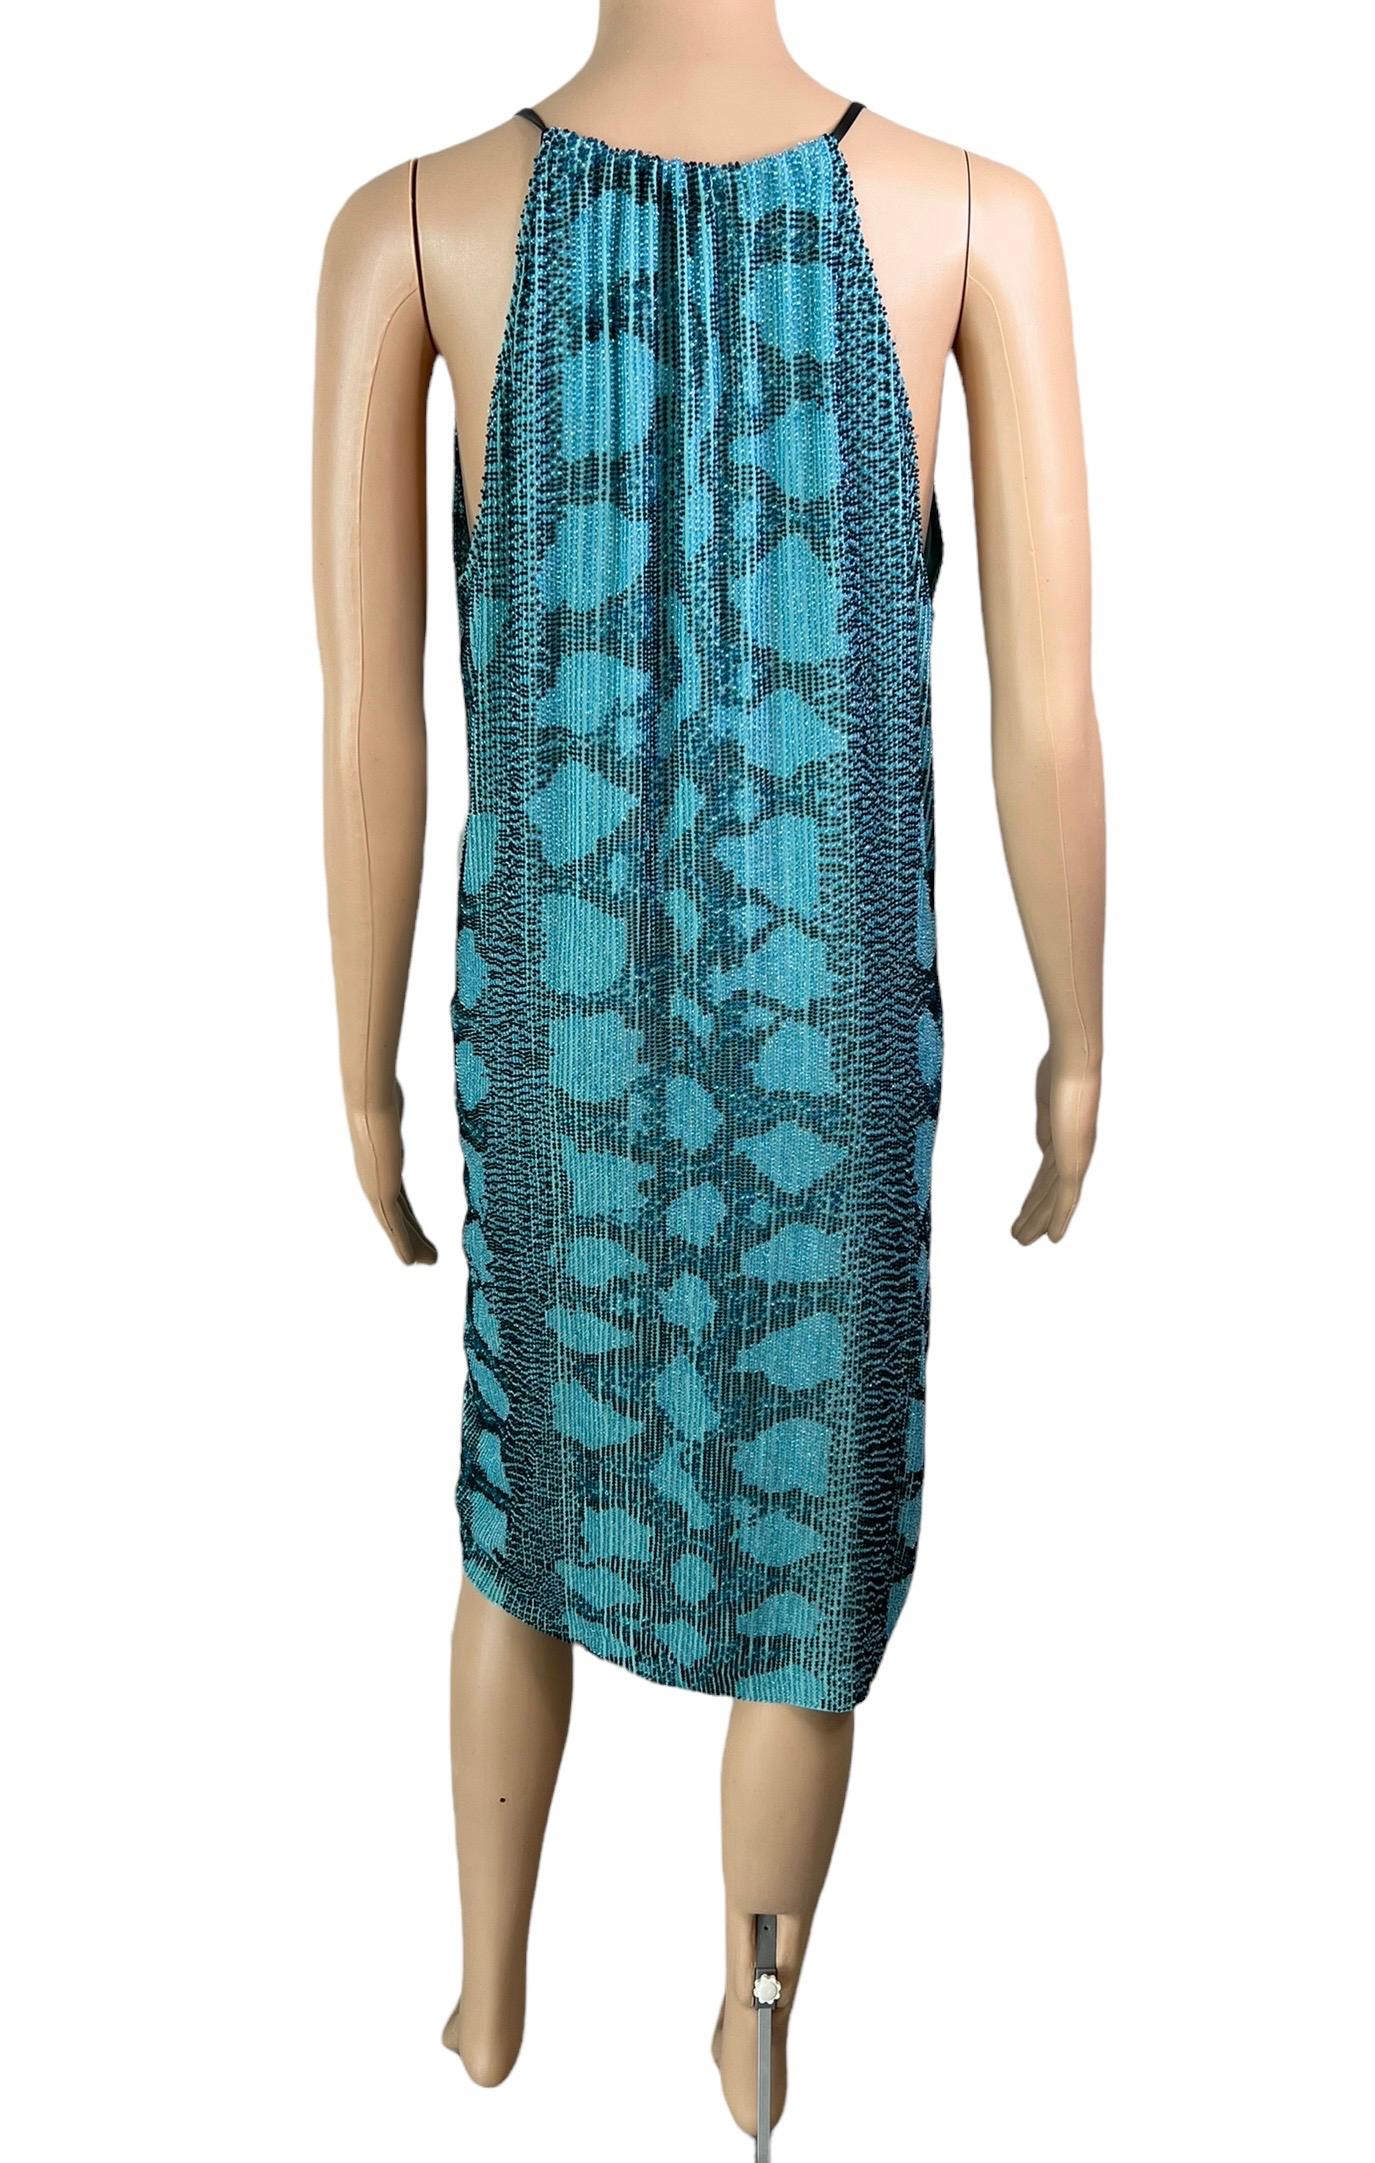 Tom Ford for Gucci S/S 2000 Runway Embellished Plunging Python Print Midi Dress In Excellent Condition In Naples, FL